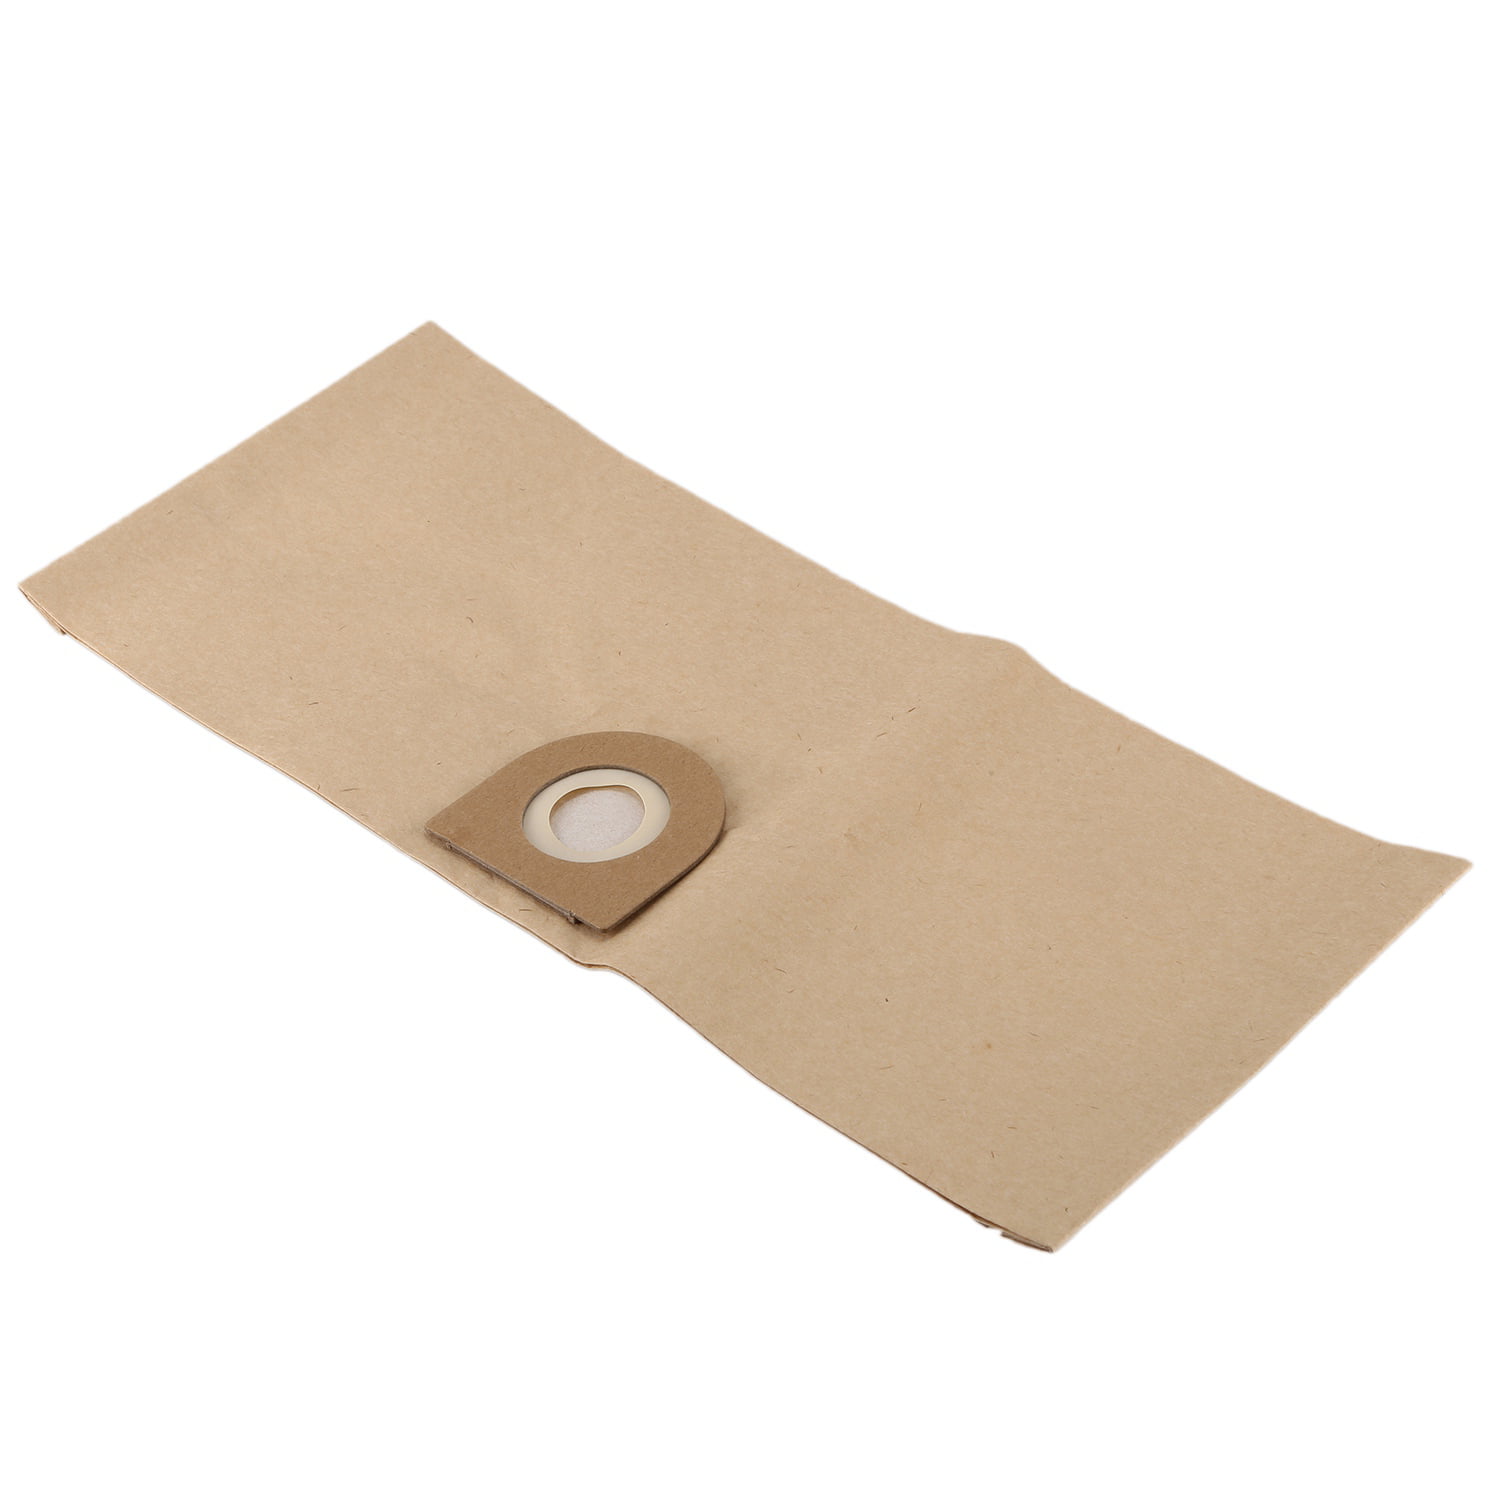 5110 10 x Dust Bags for VAX Vacuum Hoover 4000 5120 5130 5140 5000 4100 